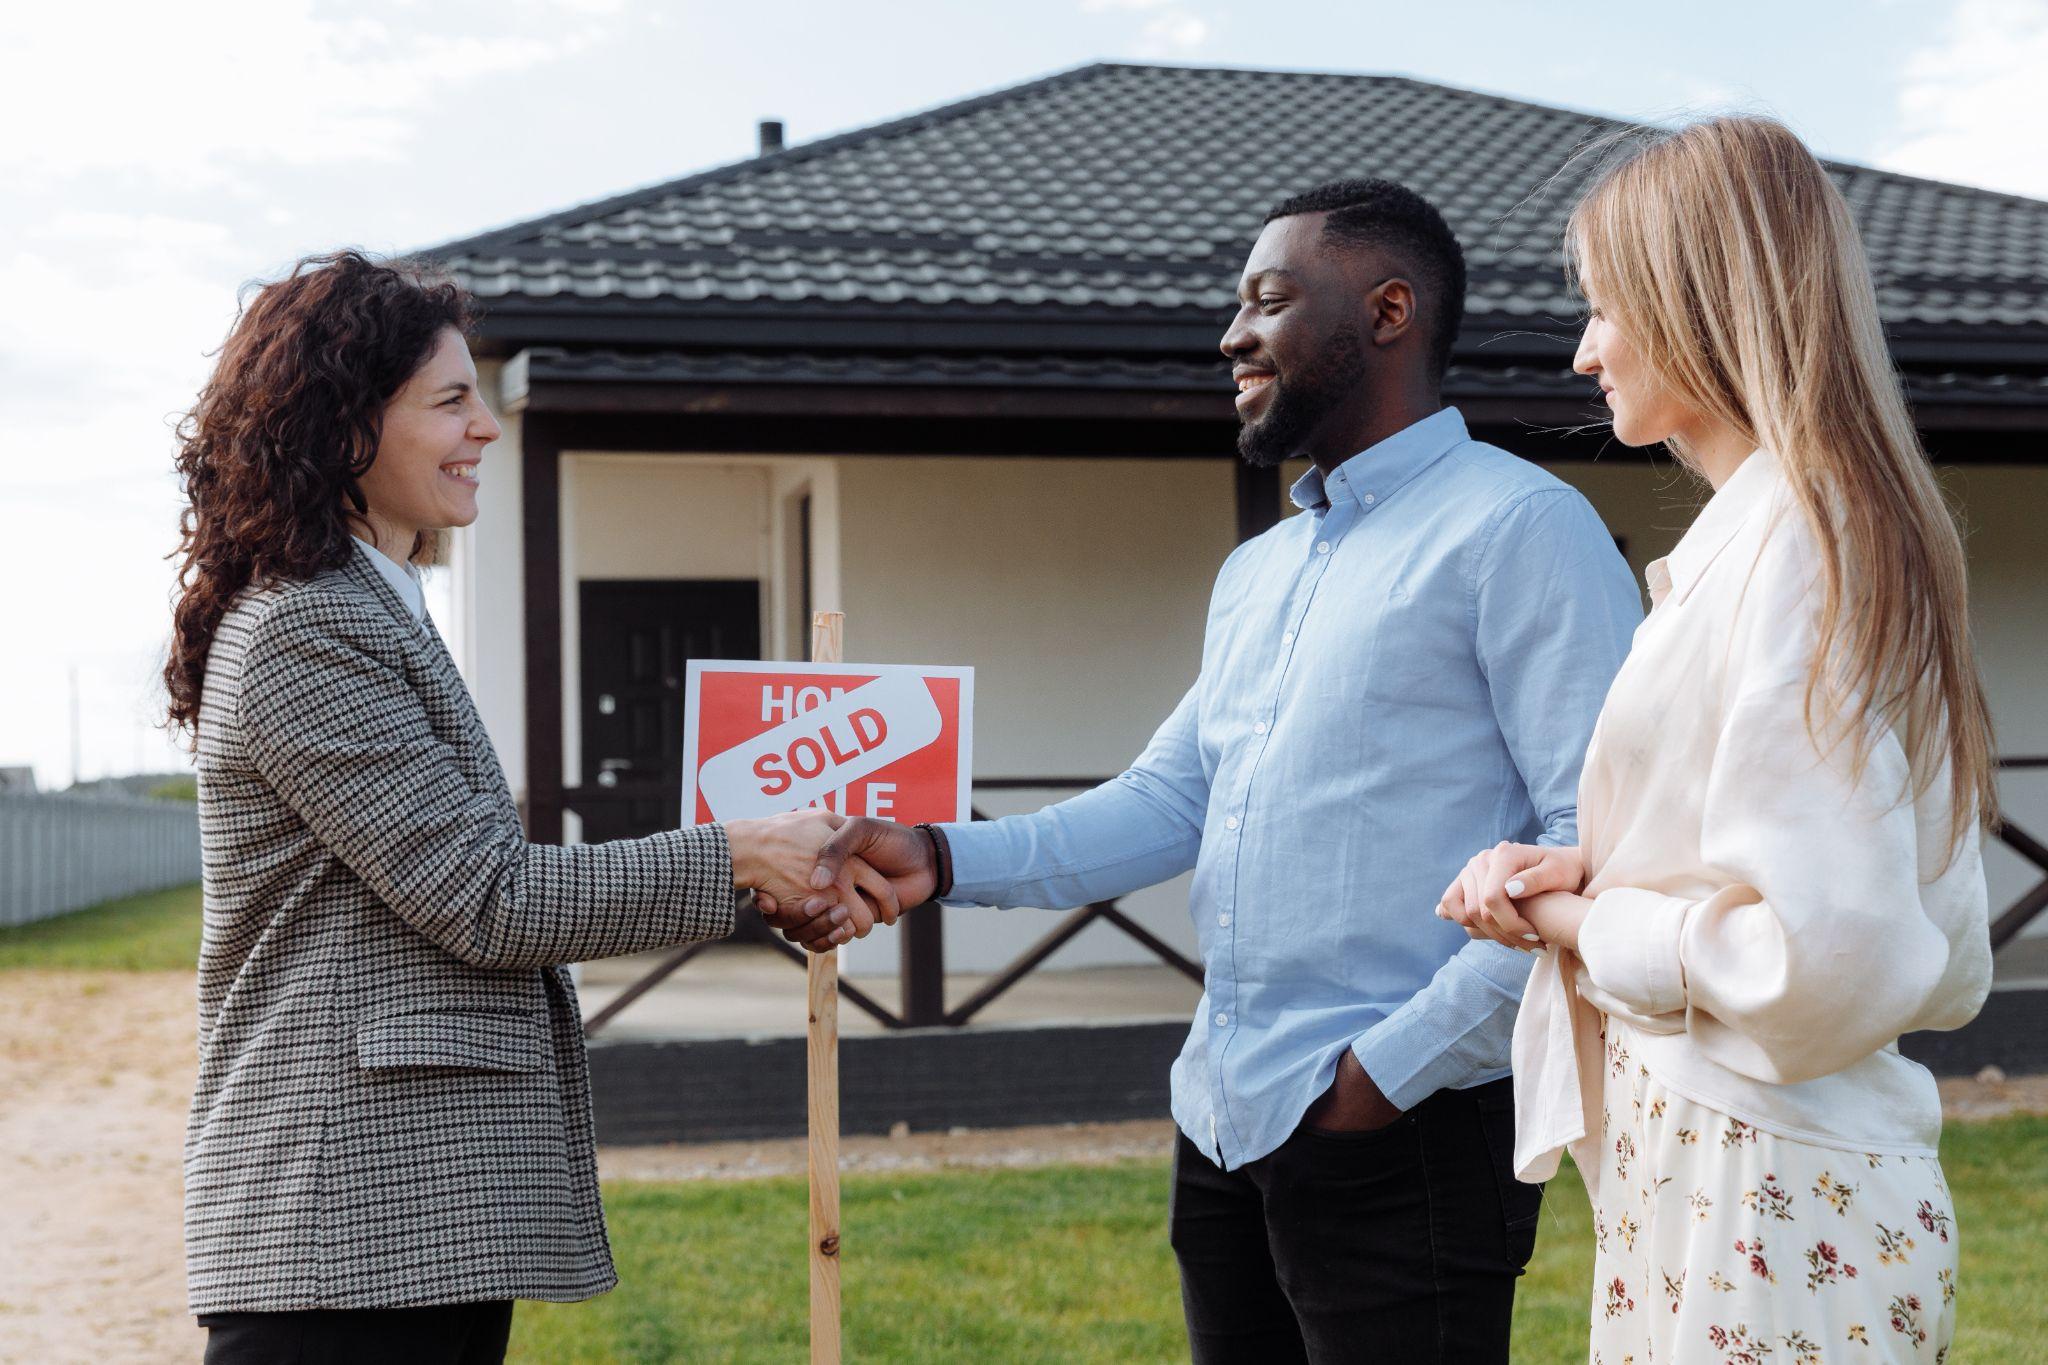 Black man shaking the hand of a real estate agent while his white partner watches in front of a house with a “Sold” sign.